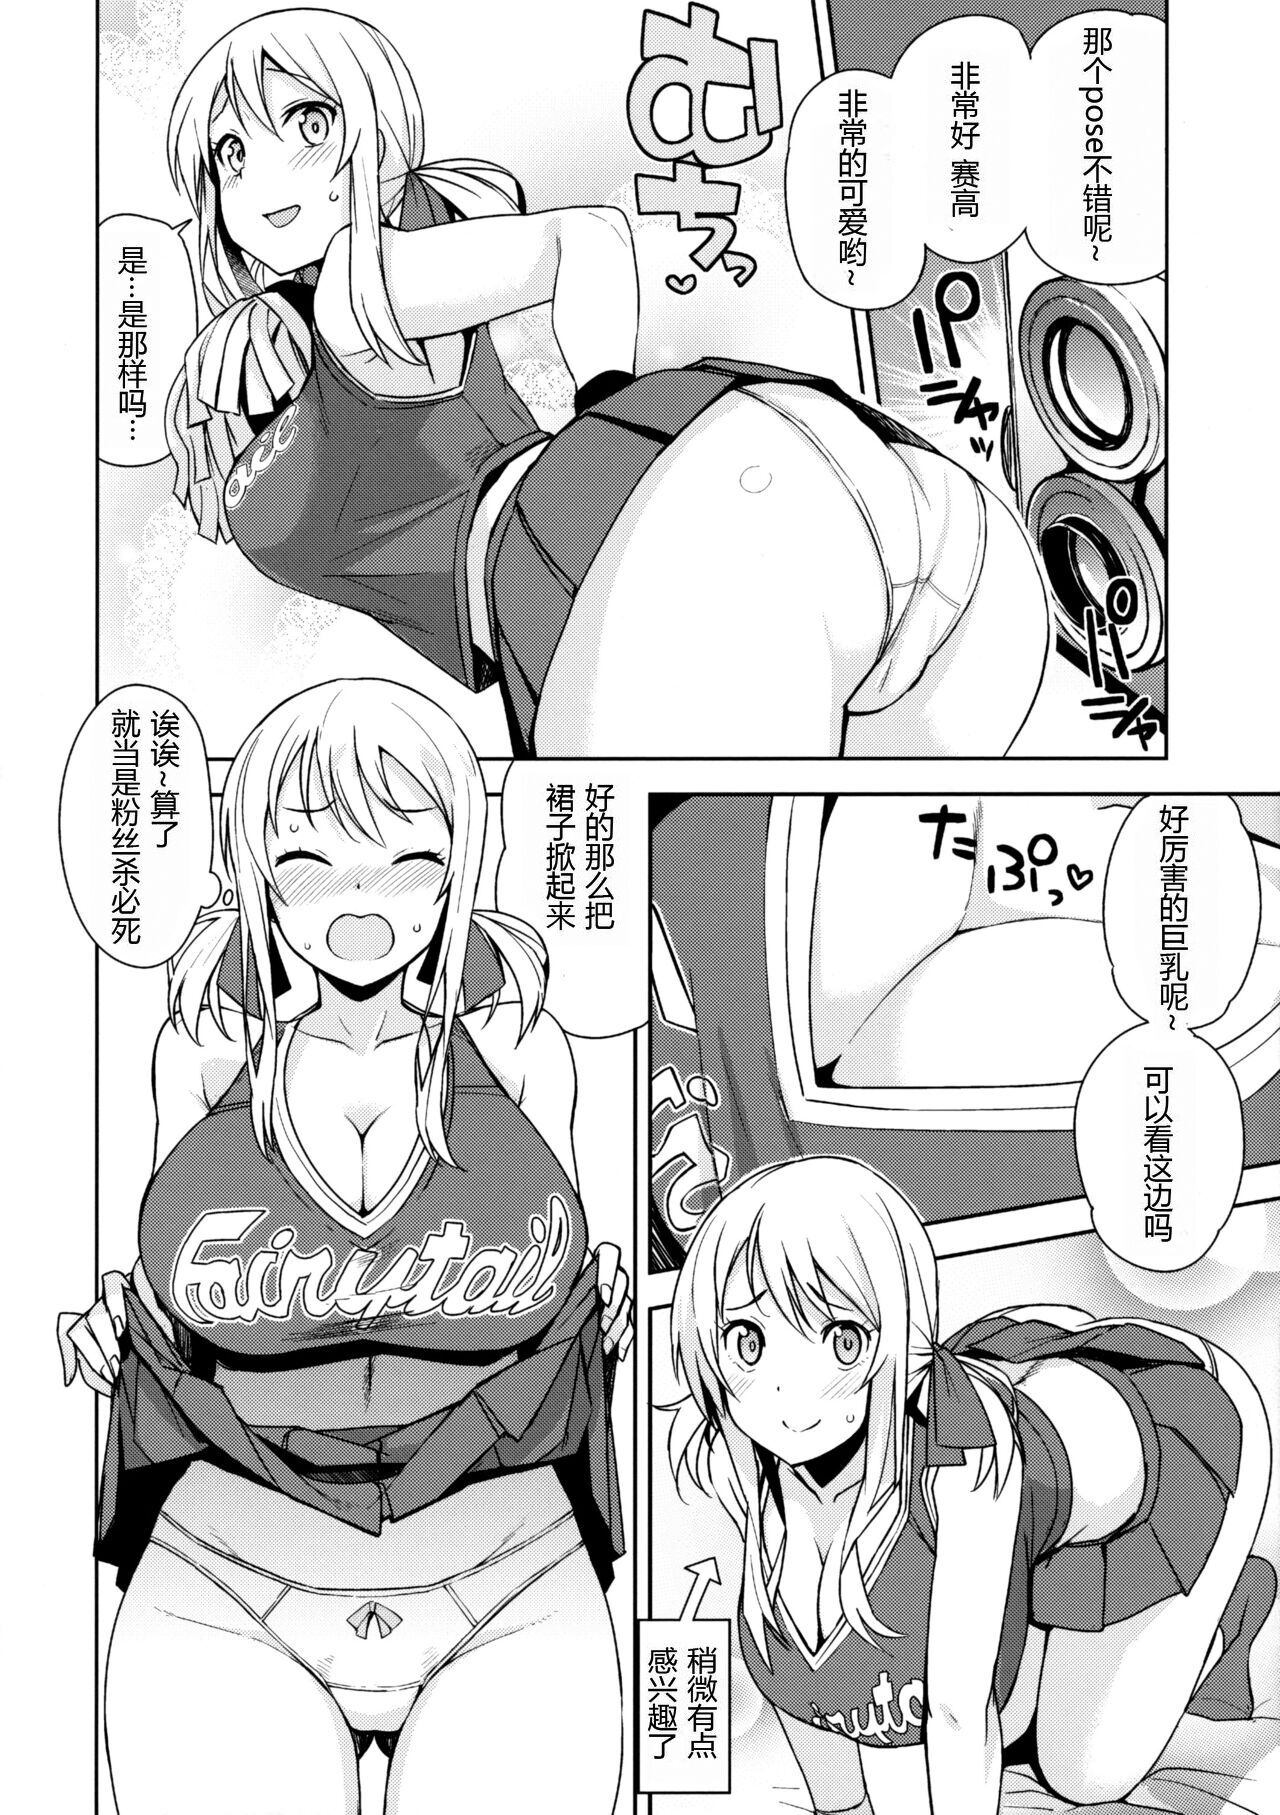 (COMIC1☆10) [Funi Funi Lab (Tamagoro)] Witch Bitch Collection Vol.2 (Fairy Tail)[Chinese] [Decensored] (COMIC1☆10) [フニフニラボ (たまごろー)] Witch Bitch Collection Vol.2 (フェアリーテイル)[中国翻訳] [無修正]